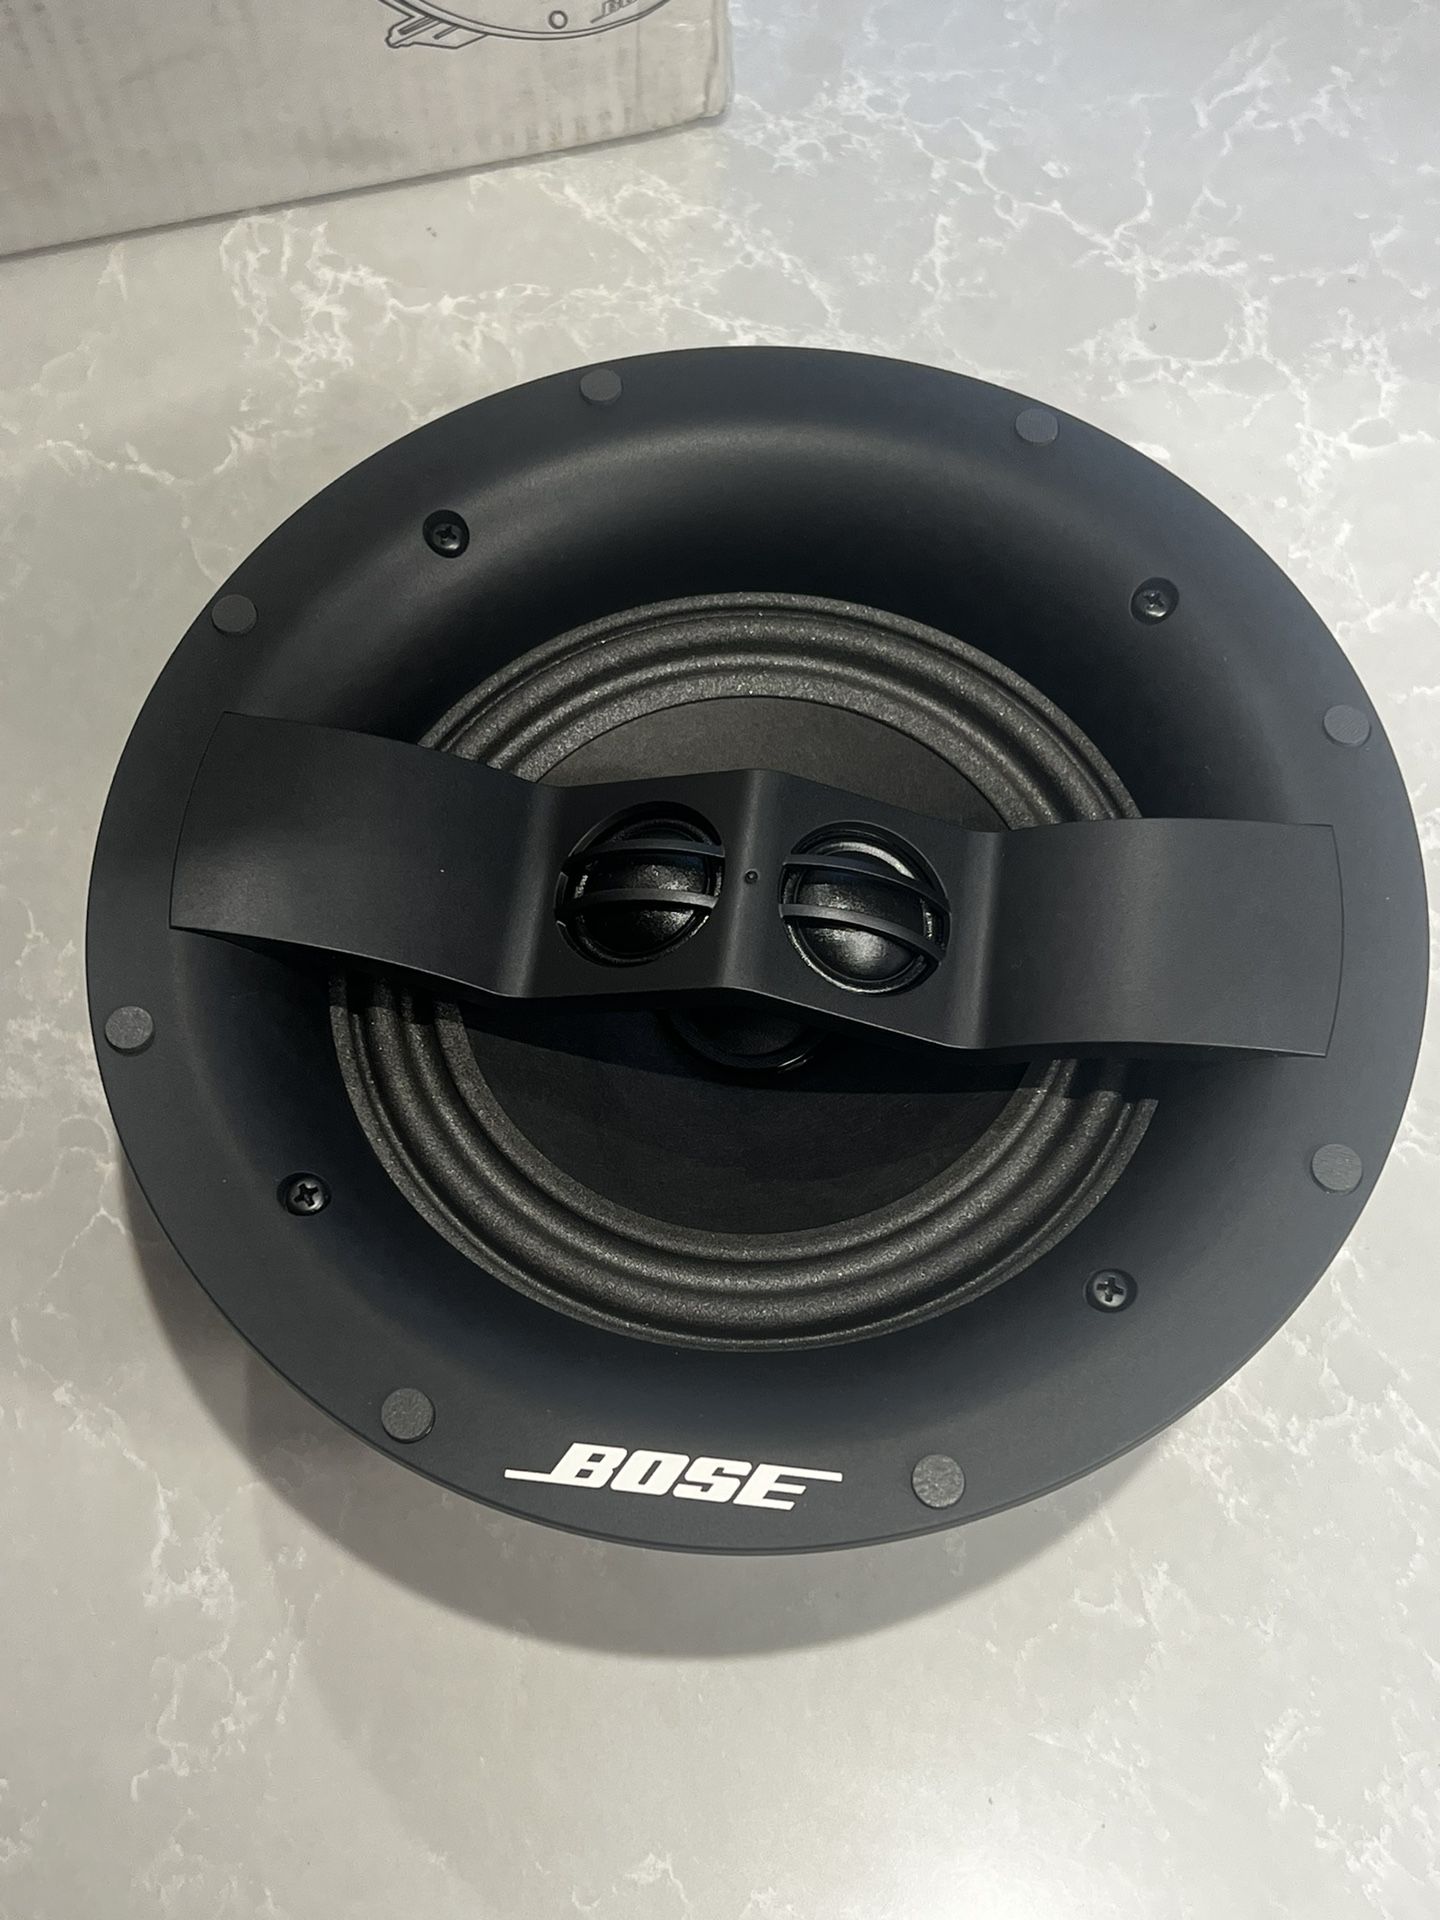 Bose Virtually Invisible 791 Series II In-Ceiling Speakers (Pair) New Open Box